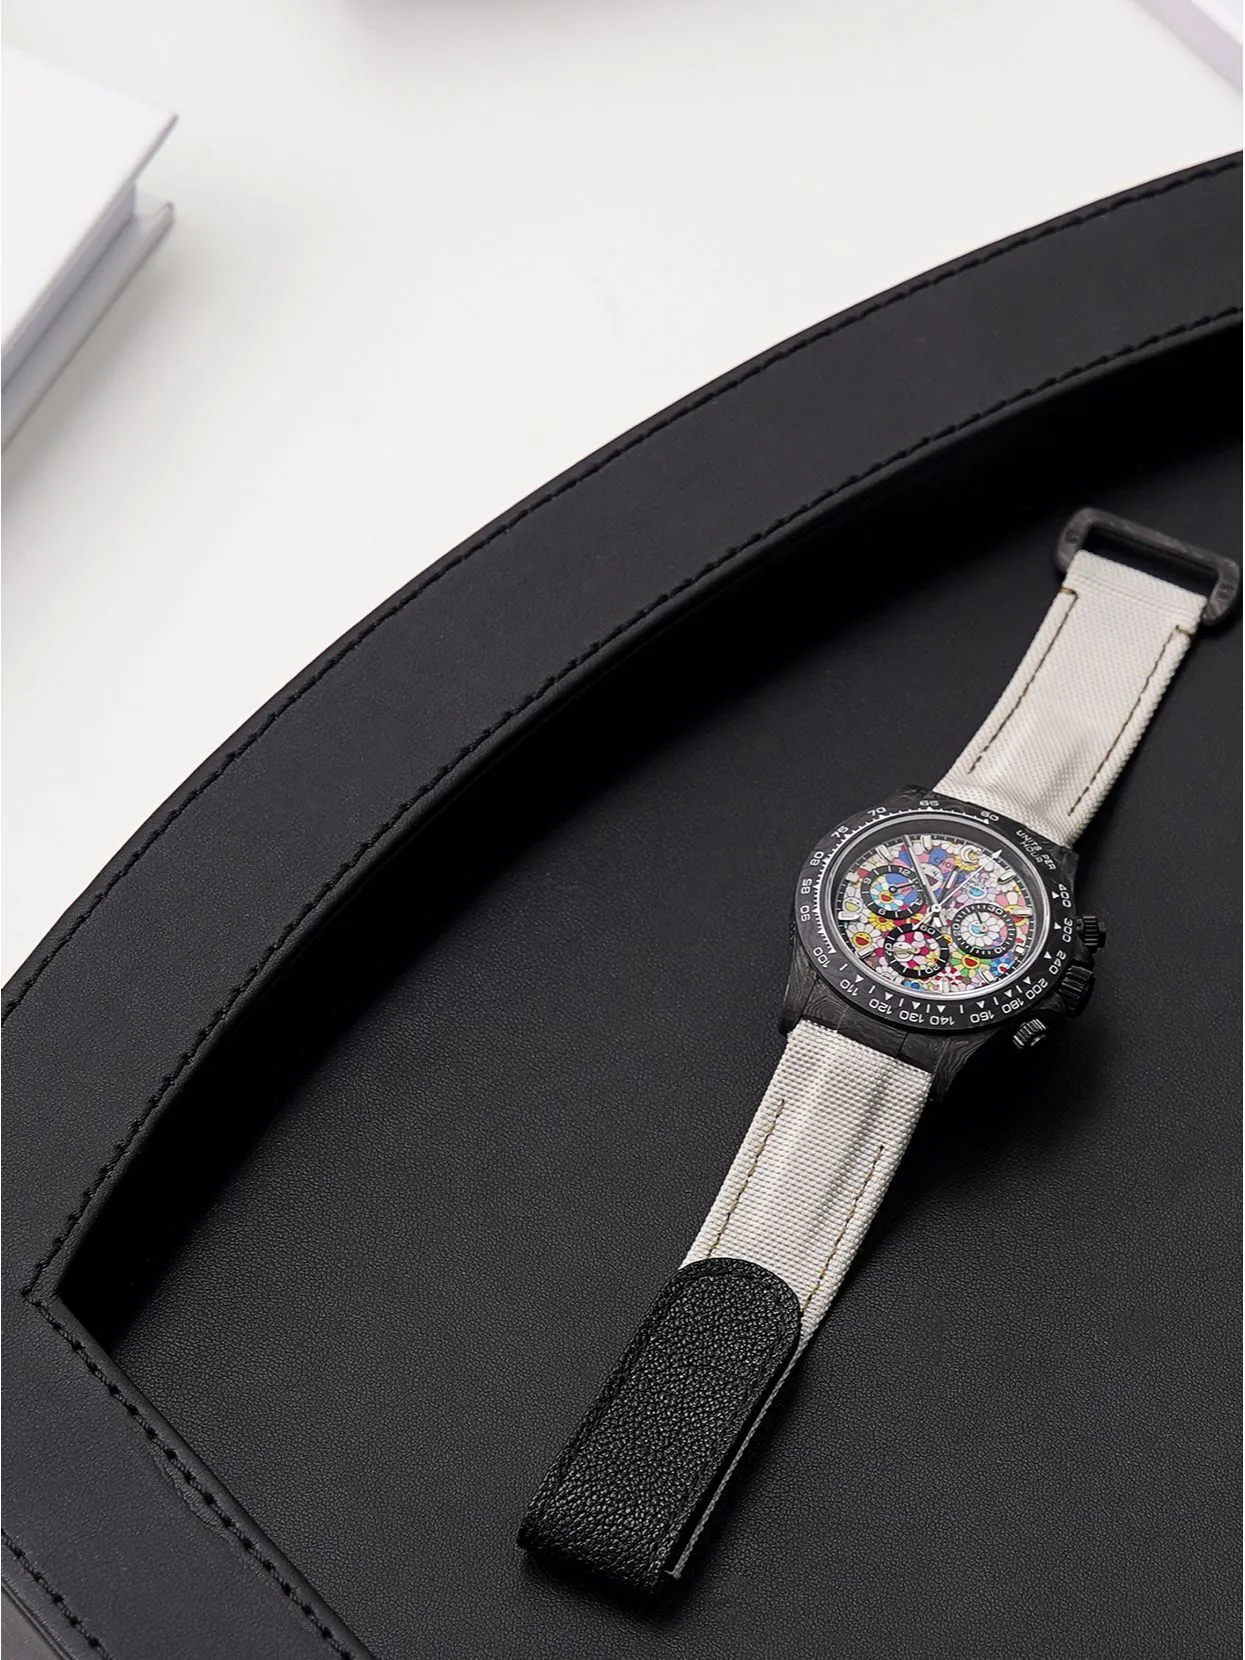 Introducing the Cosmic Daytona Series: A Fusion of Style and Innovation |  Luxury Timepiece